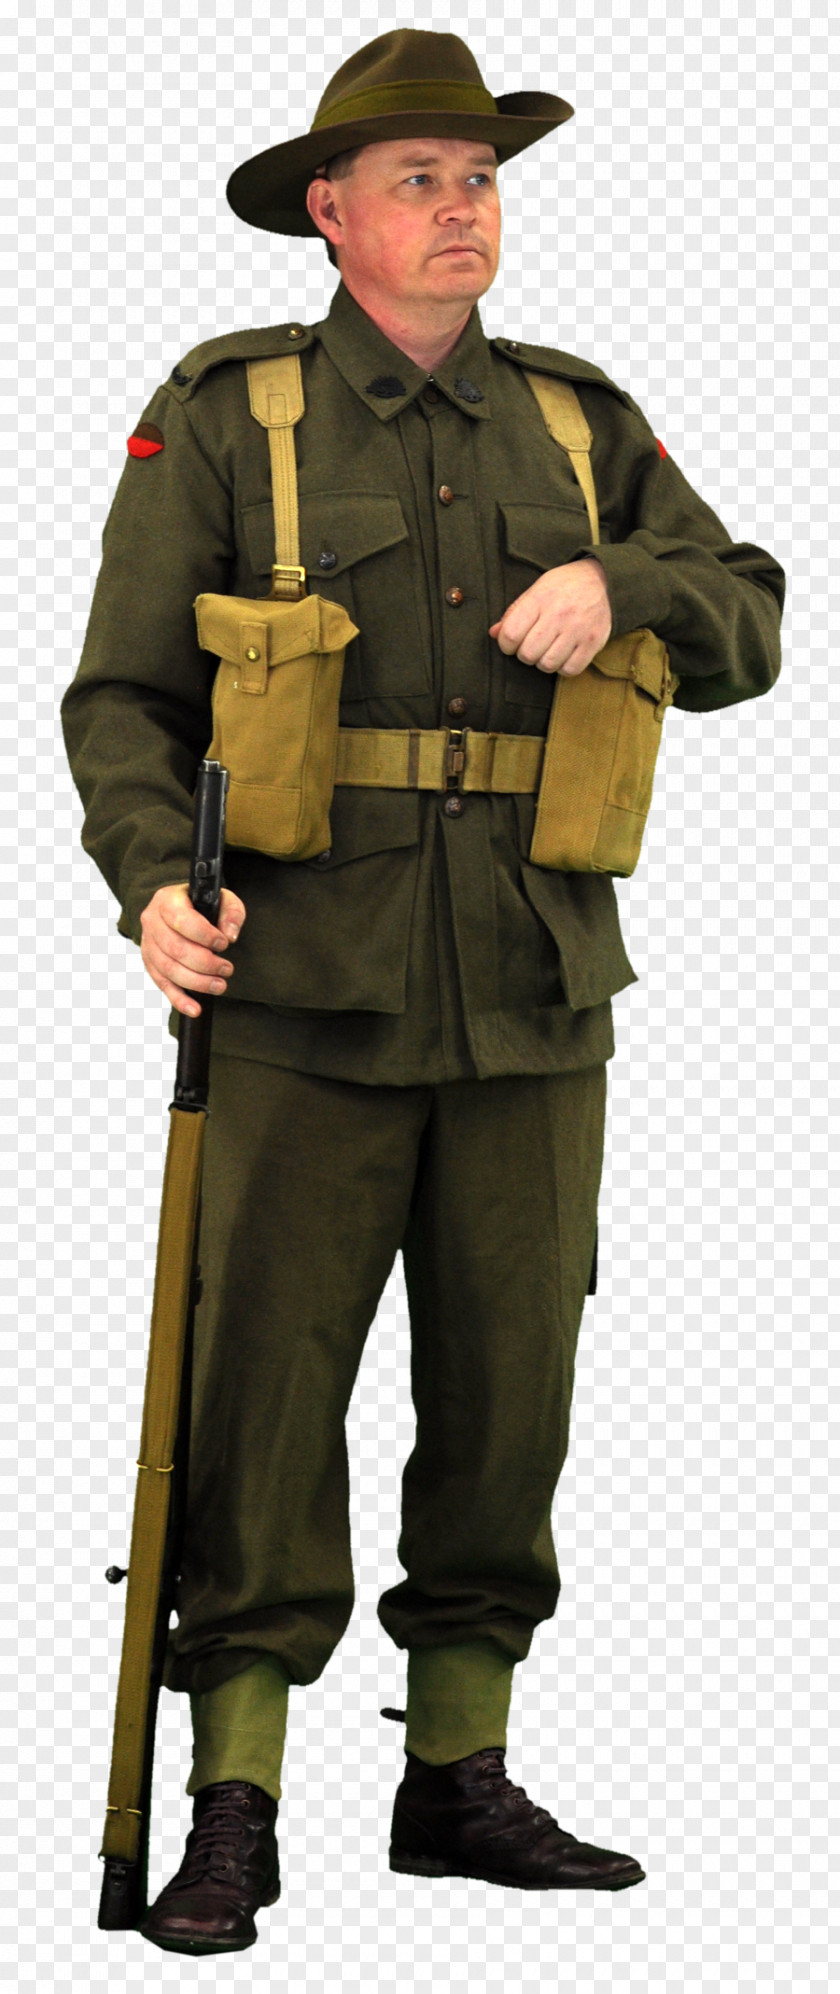 Army Soldiers Soldier Second World War Military Uniform PNG